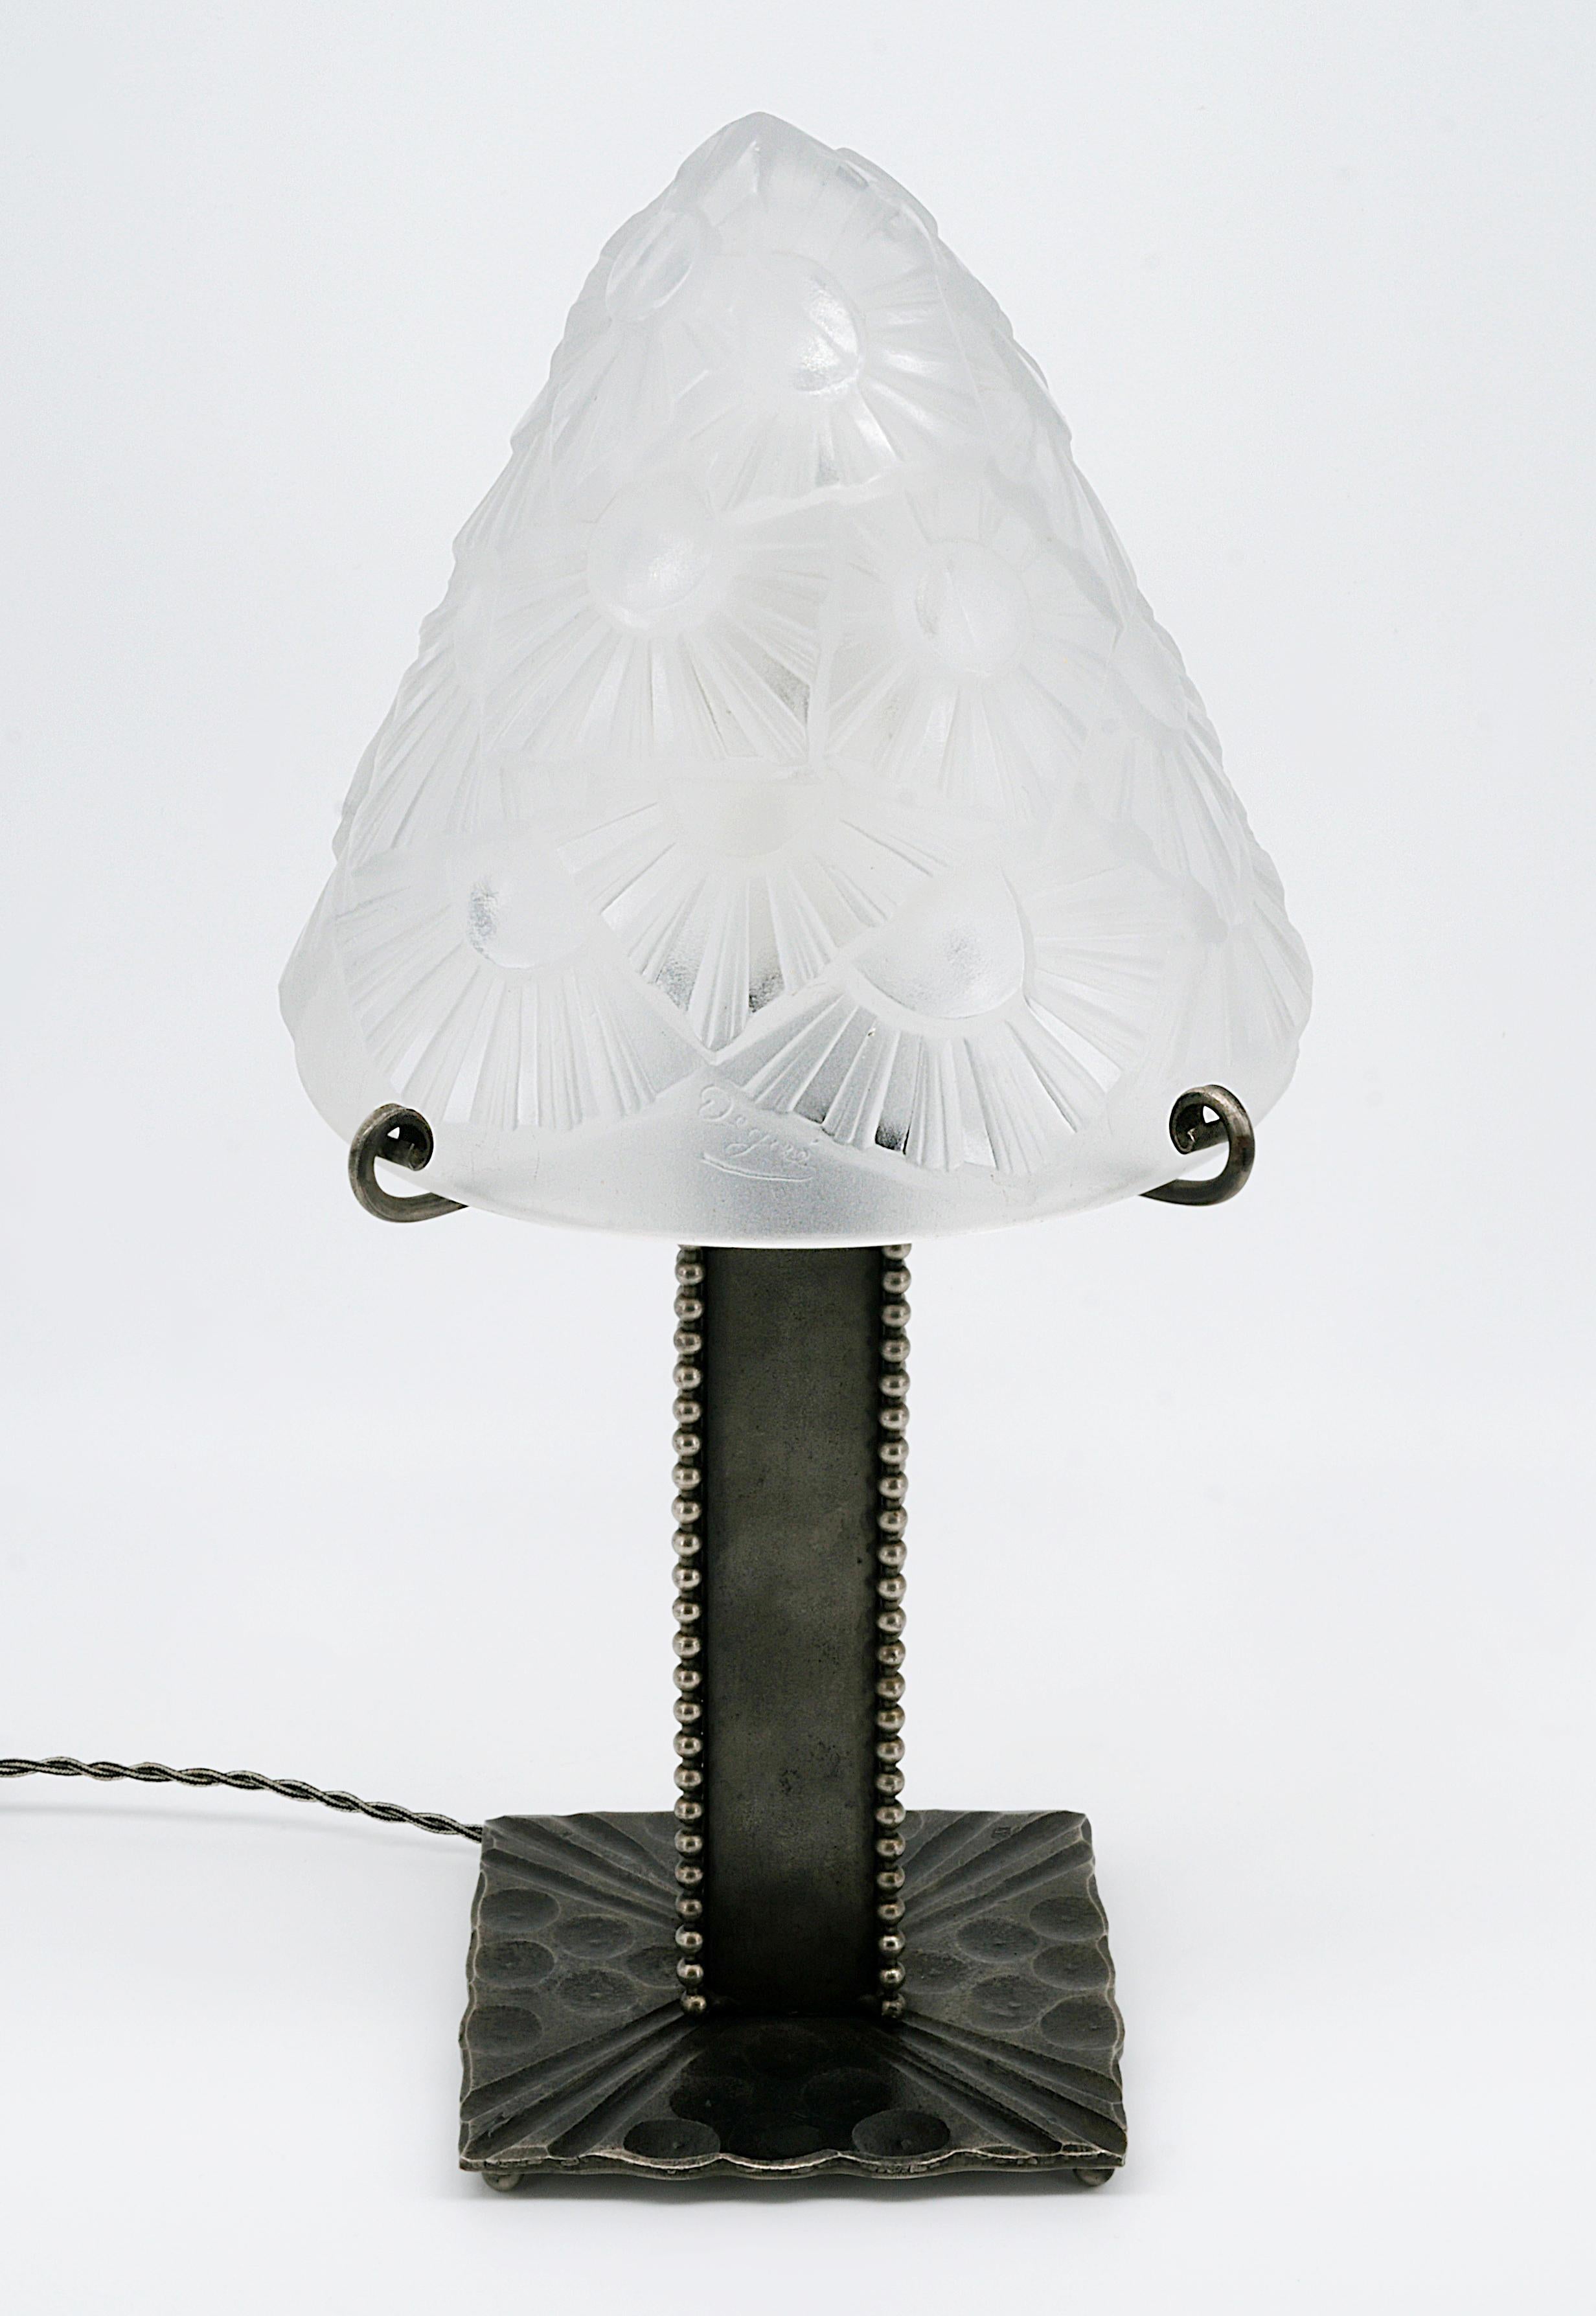 French Art Deco table lamp by DEGUE (Compiegne) and Marcel VASSEUR, 22 rue Mousset-Robert in Paris, France, late 1920s. Thick Frosted molded glass shade by Degue on its superb wrought iron base by Marcel Vasseur. Height: 14.2